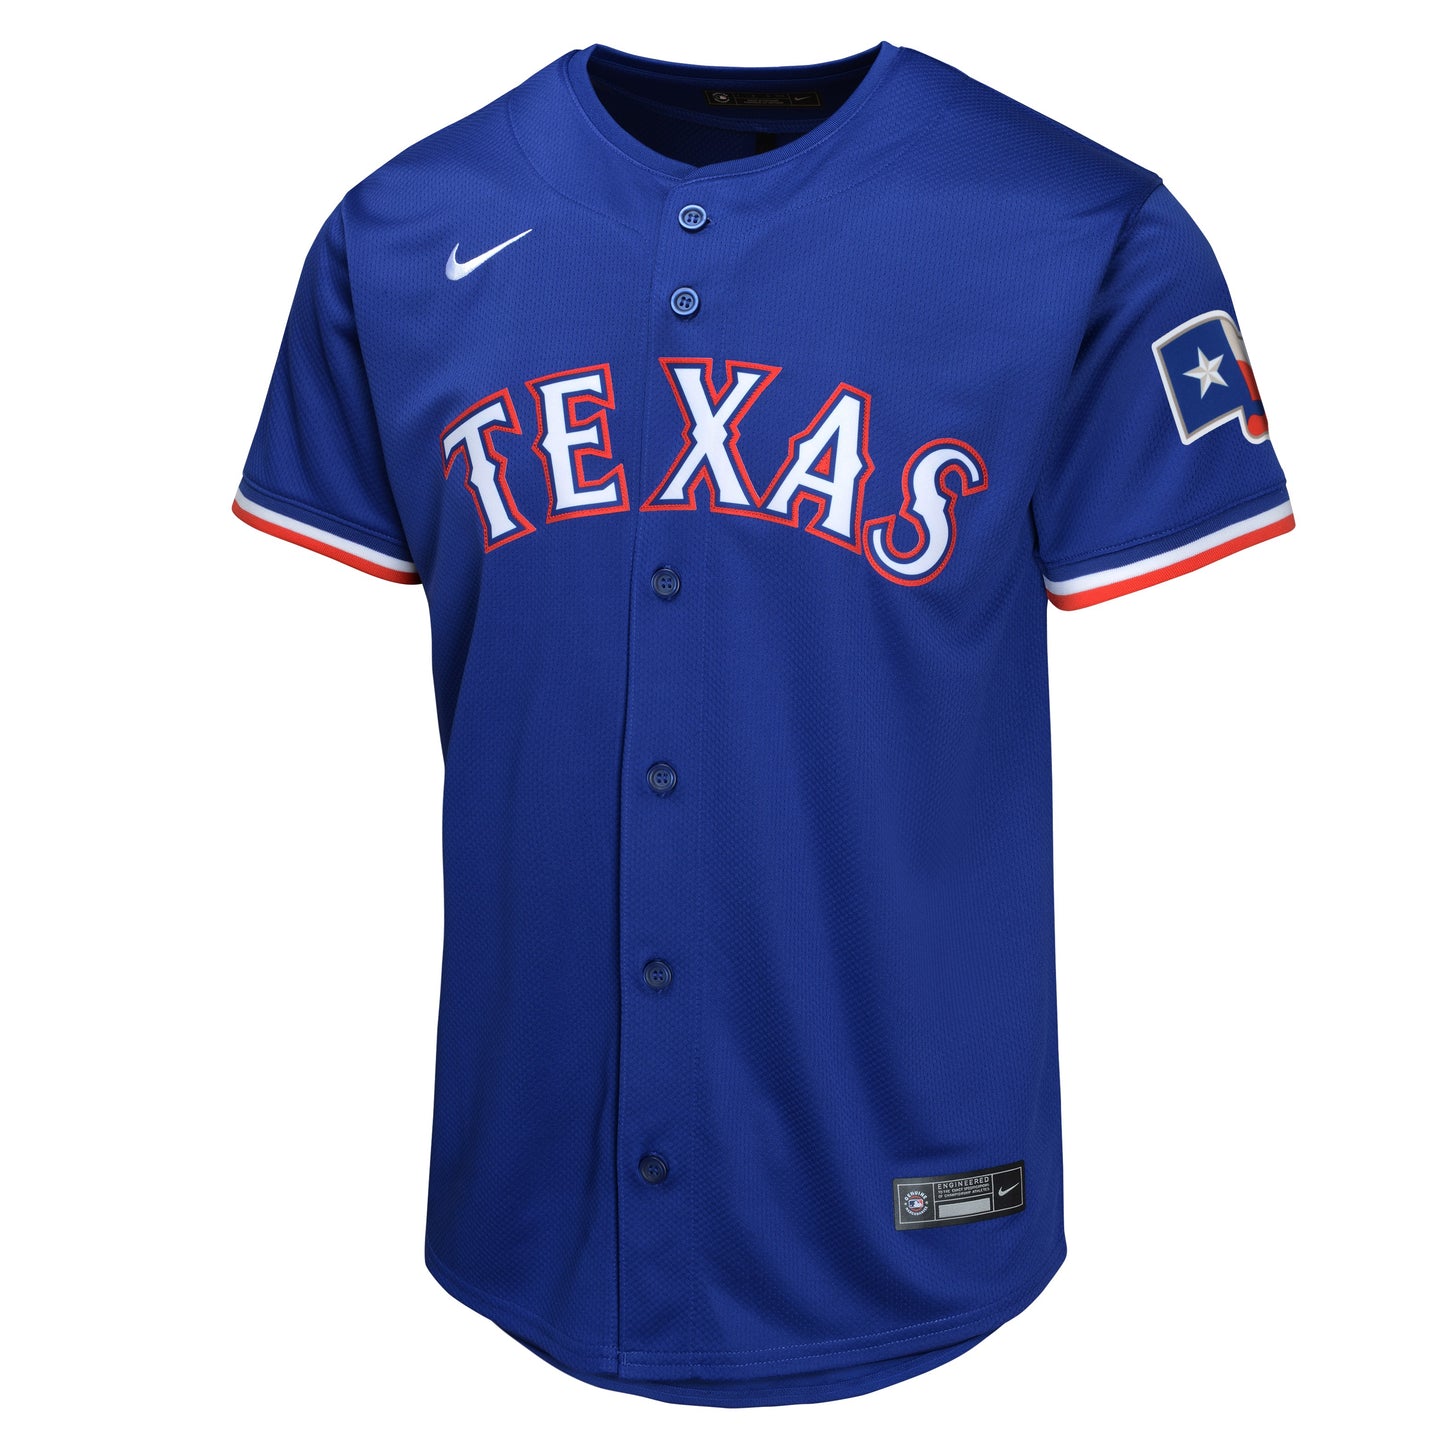 Youth Corey Seager Texas Rangers NIKE Royal Blue Alternate Limited Replica Jersey (Copy)